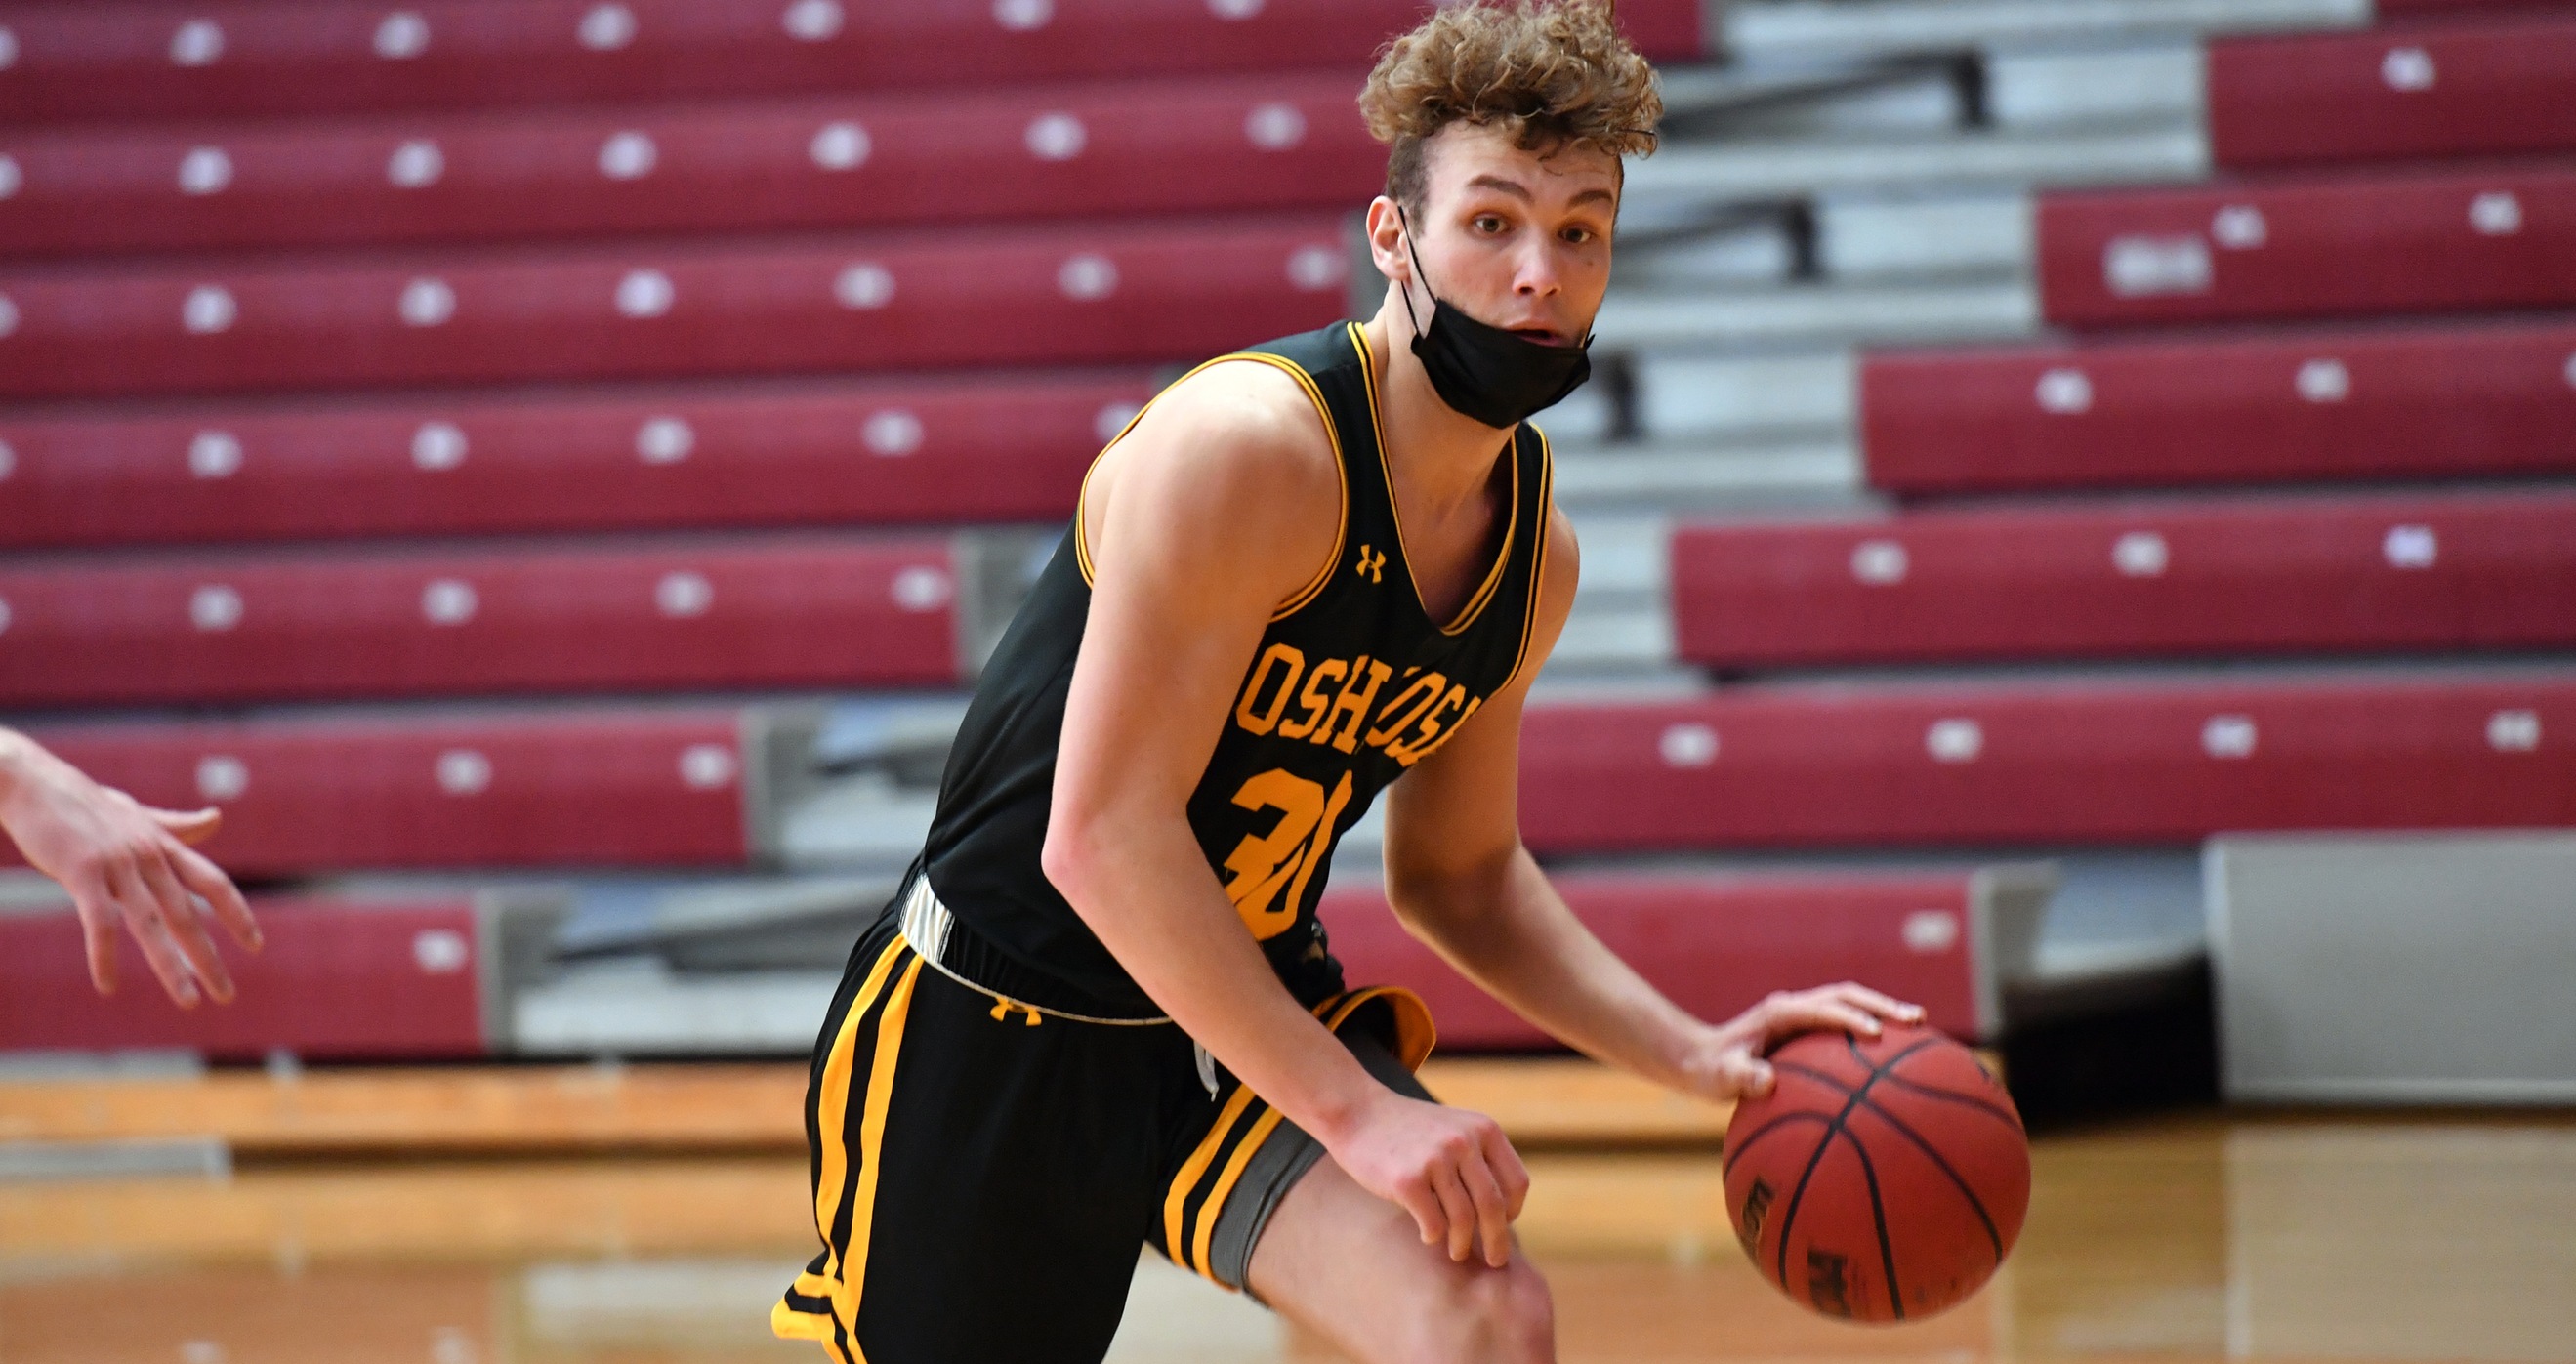 Levi Borchert's fourth double-double of the season featured 16 points and 10 rebounds against the Eagles.